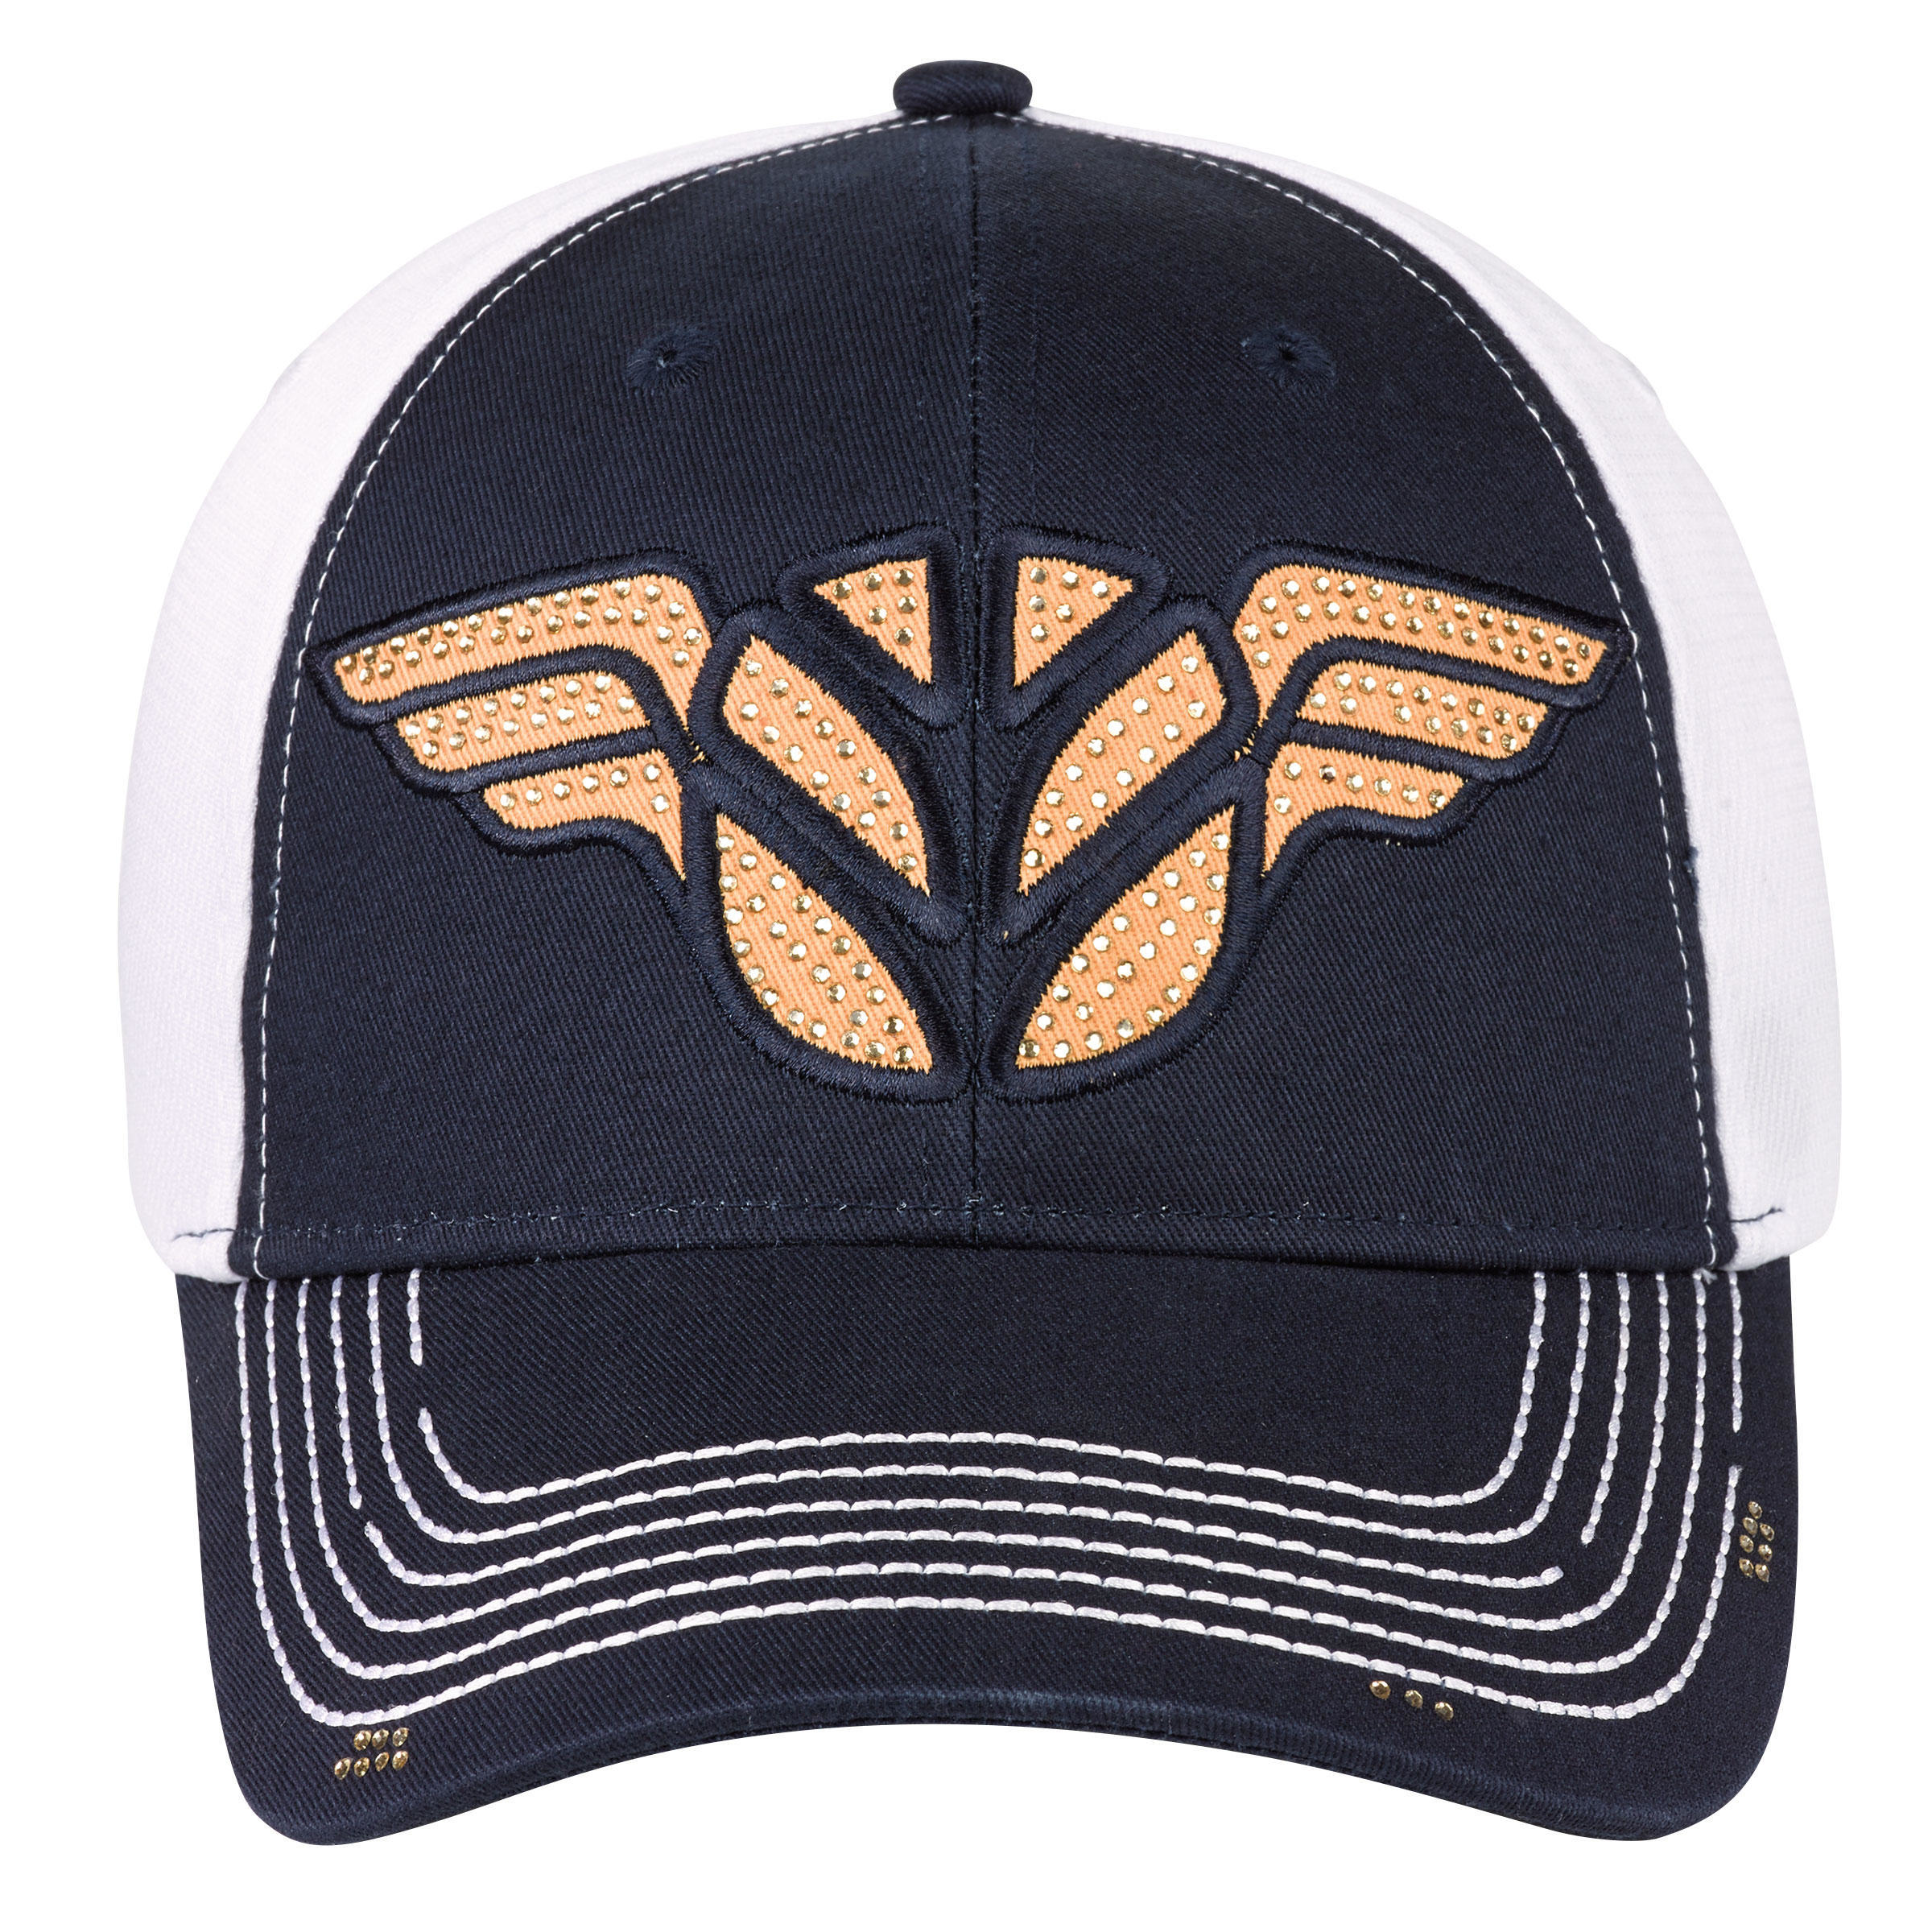 Apparel & Collectibles #288334 New Holland Ladies Armstrong Cap image 1